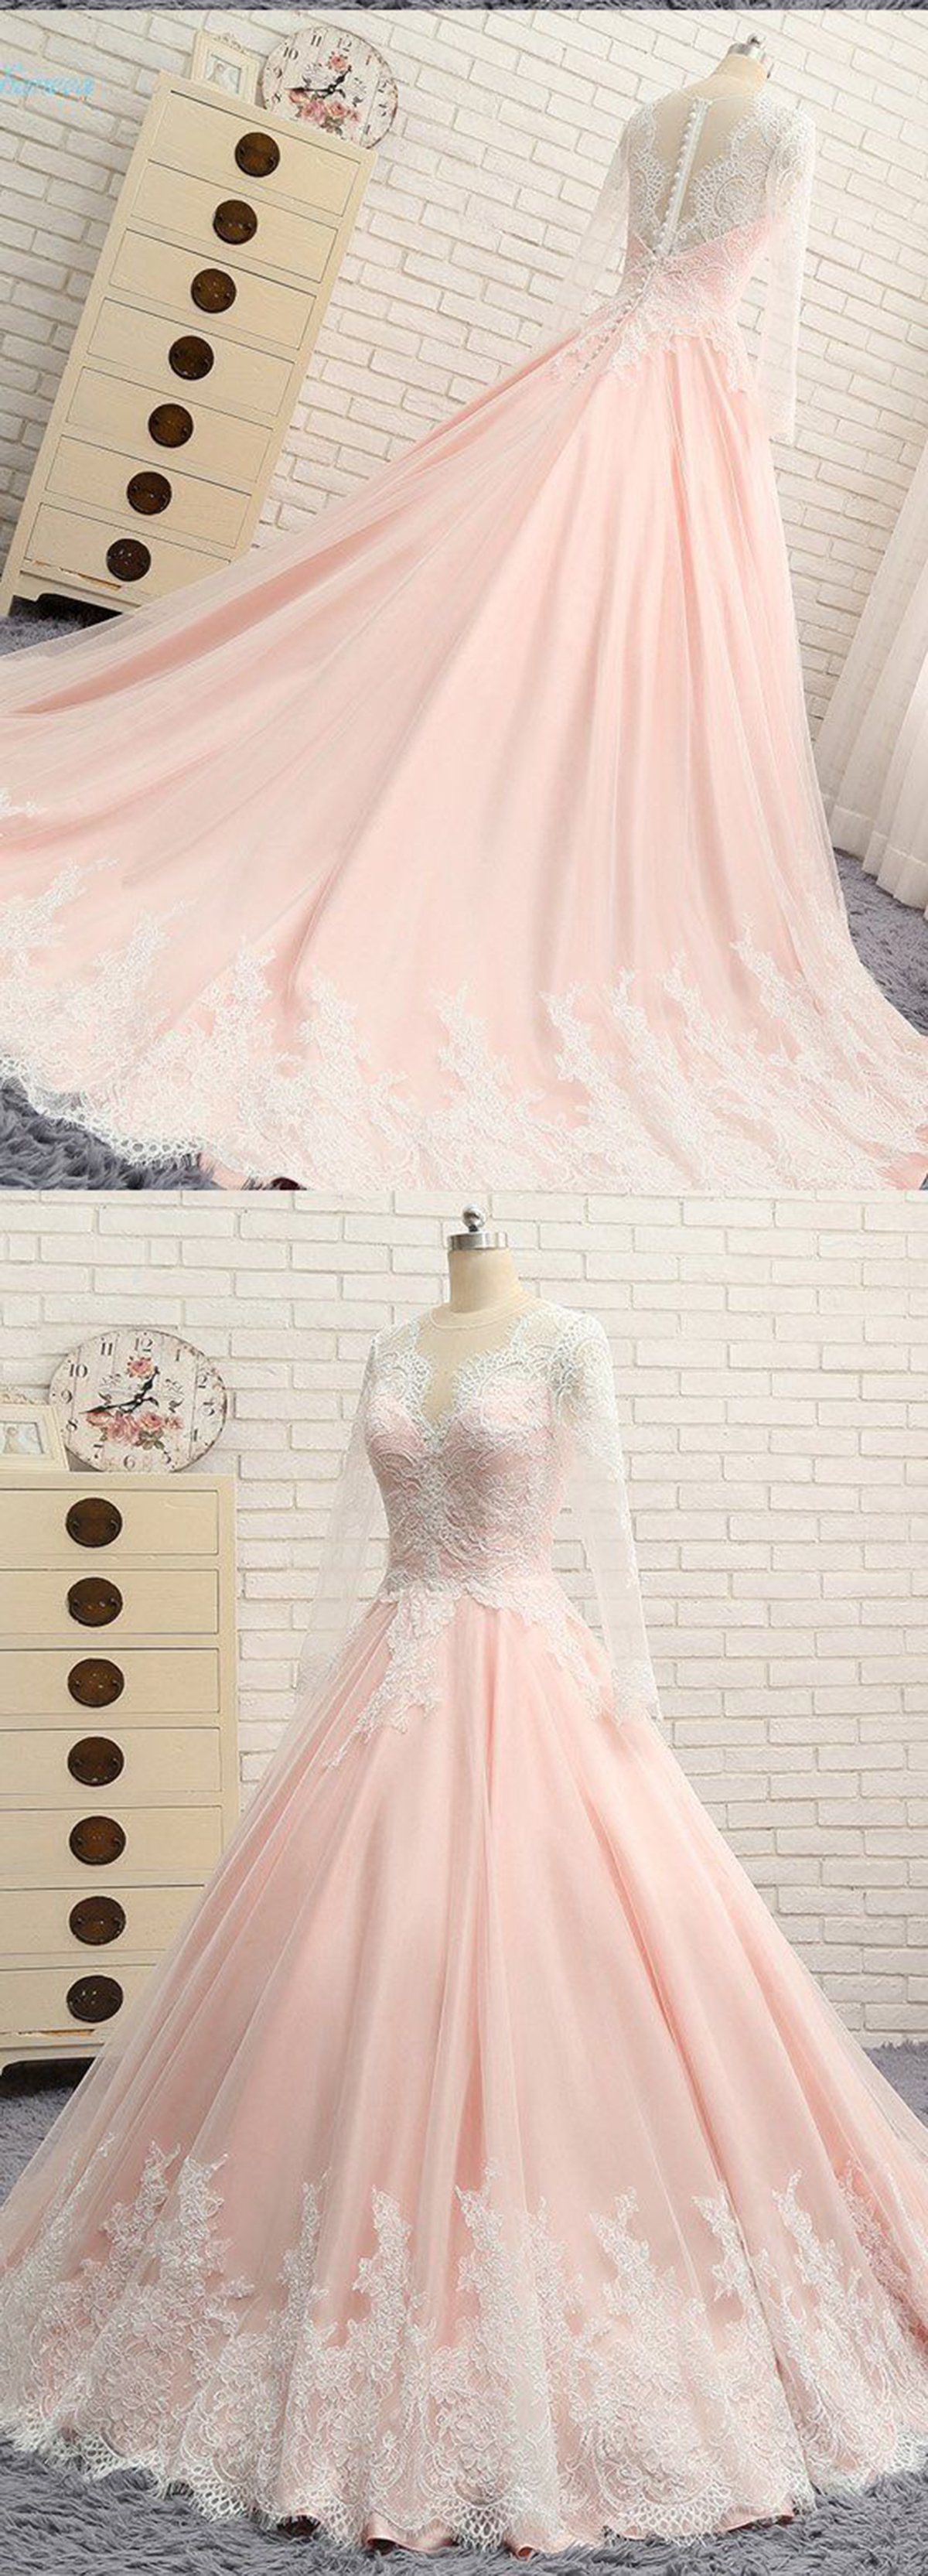 Quinceanera Dress,sweet Dresses,blush Pink Chiffon Long Lace A-line Senior Prom Dress With Sleeves